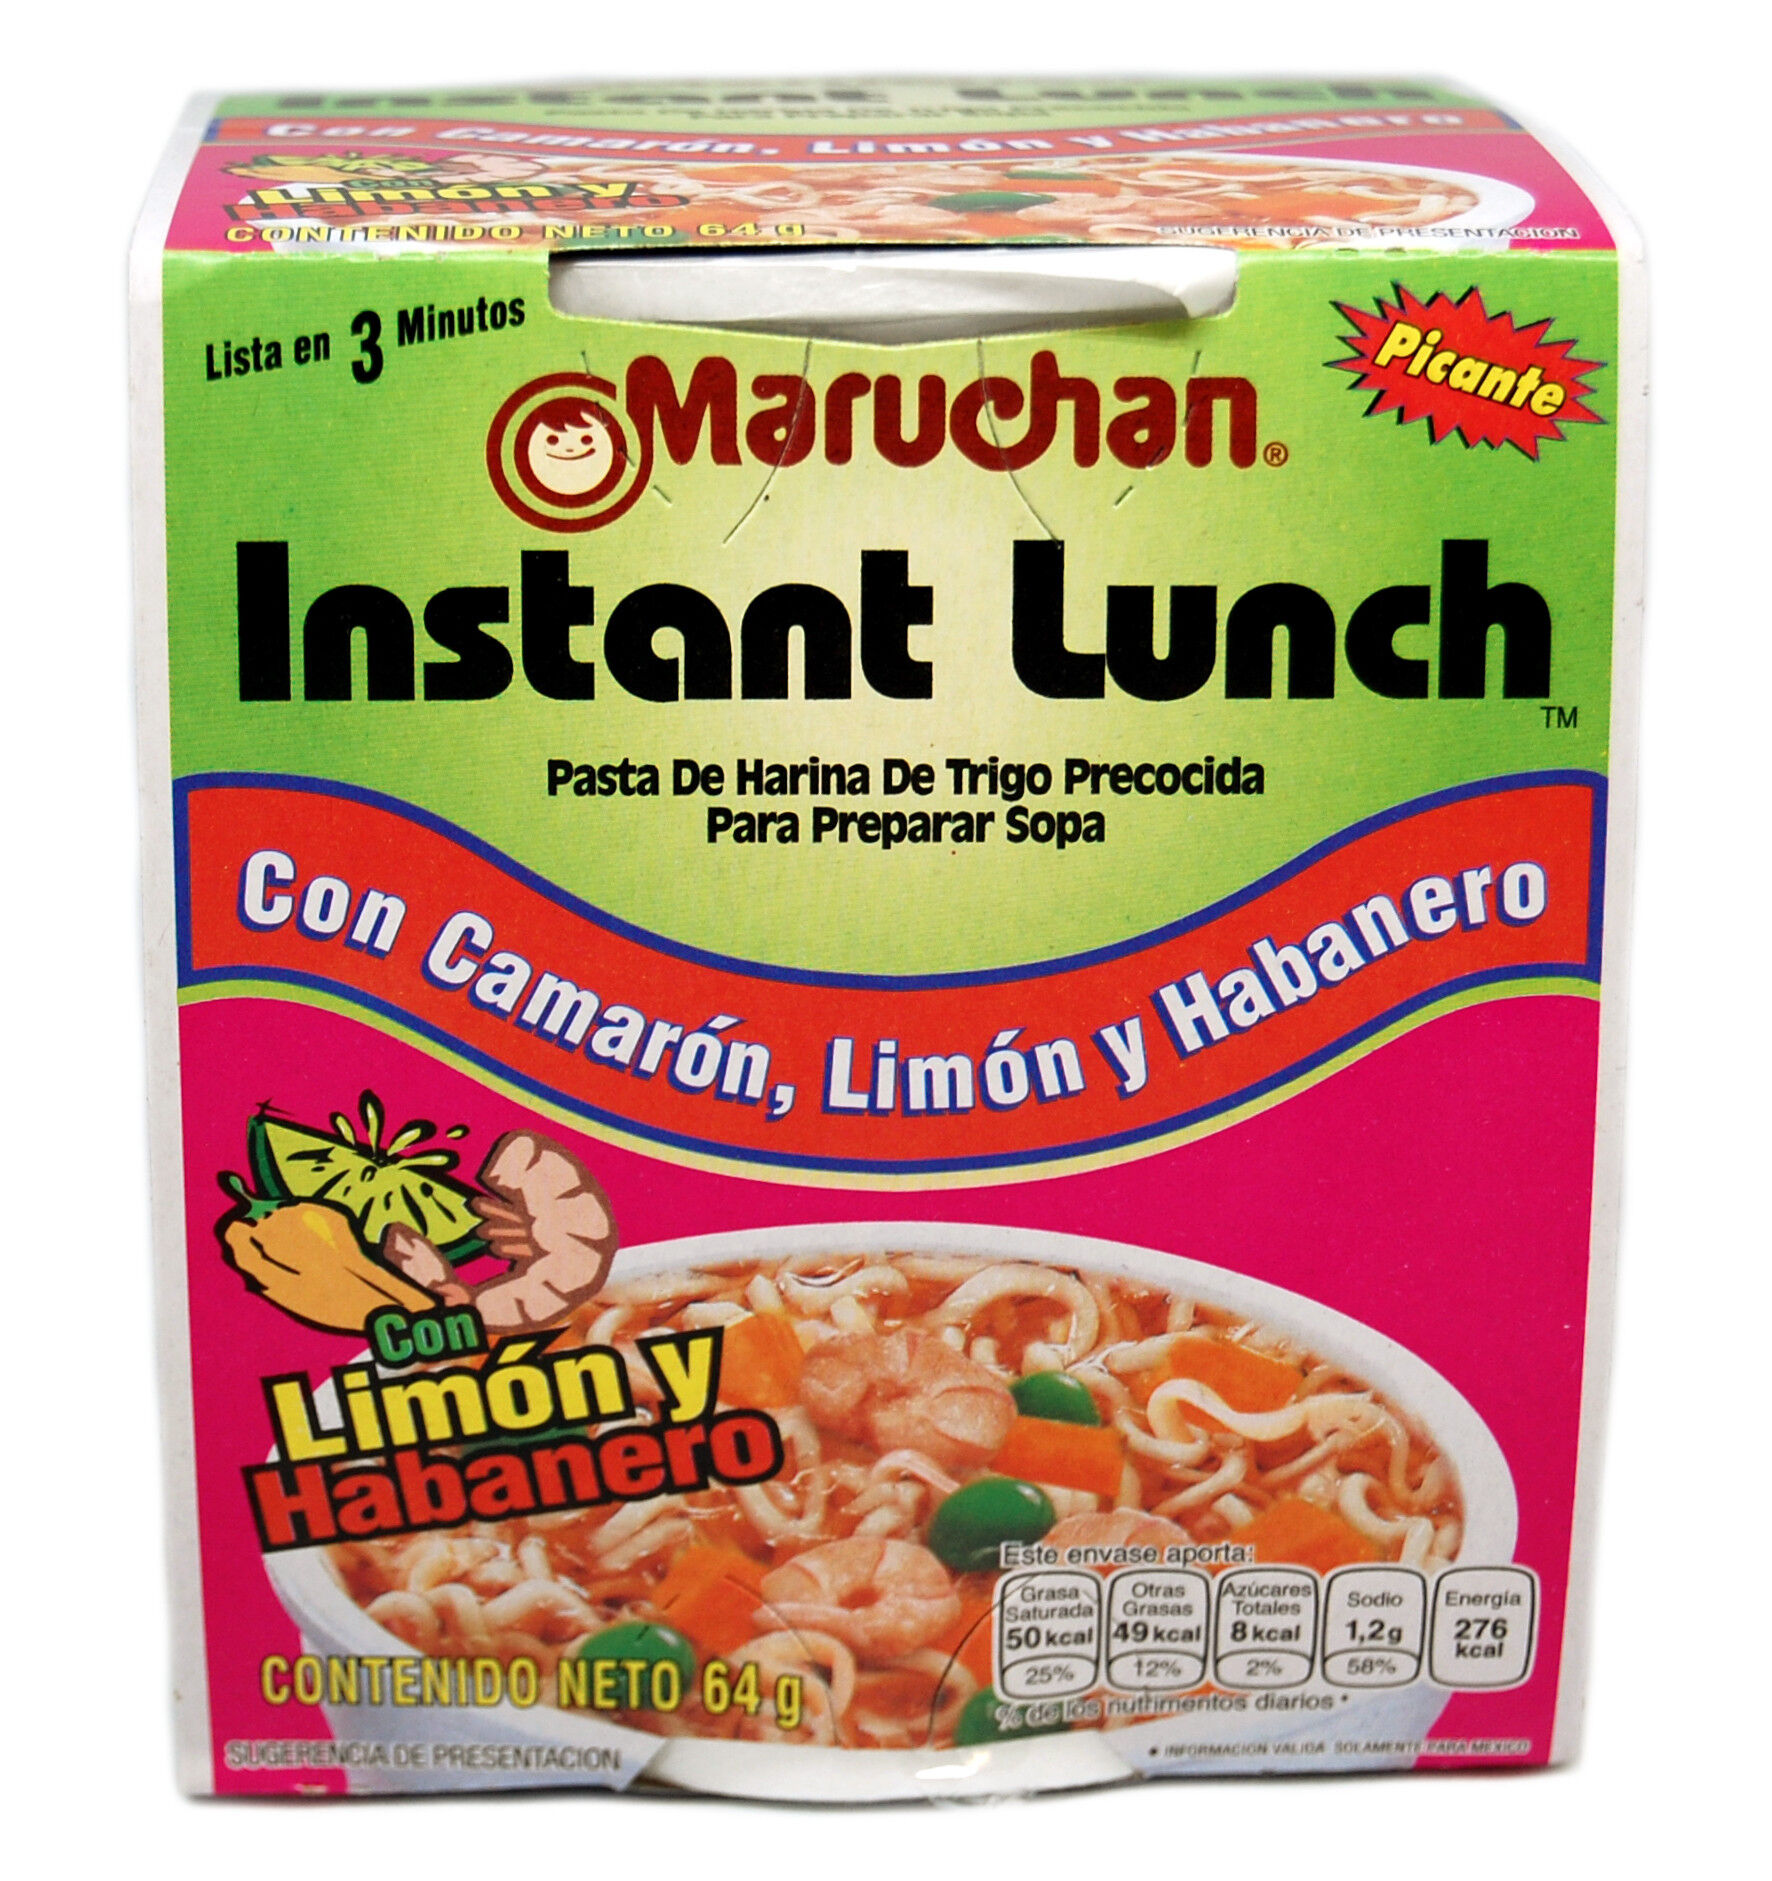 Maruchan Shrimp with Lime and Habanero Soup